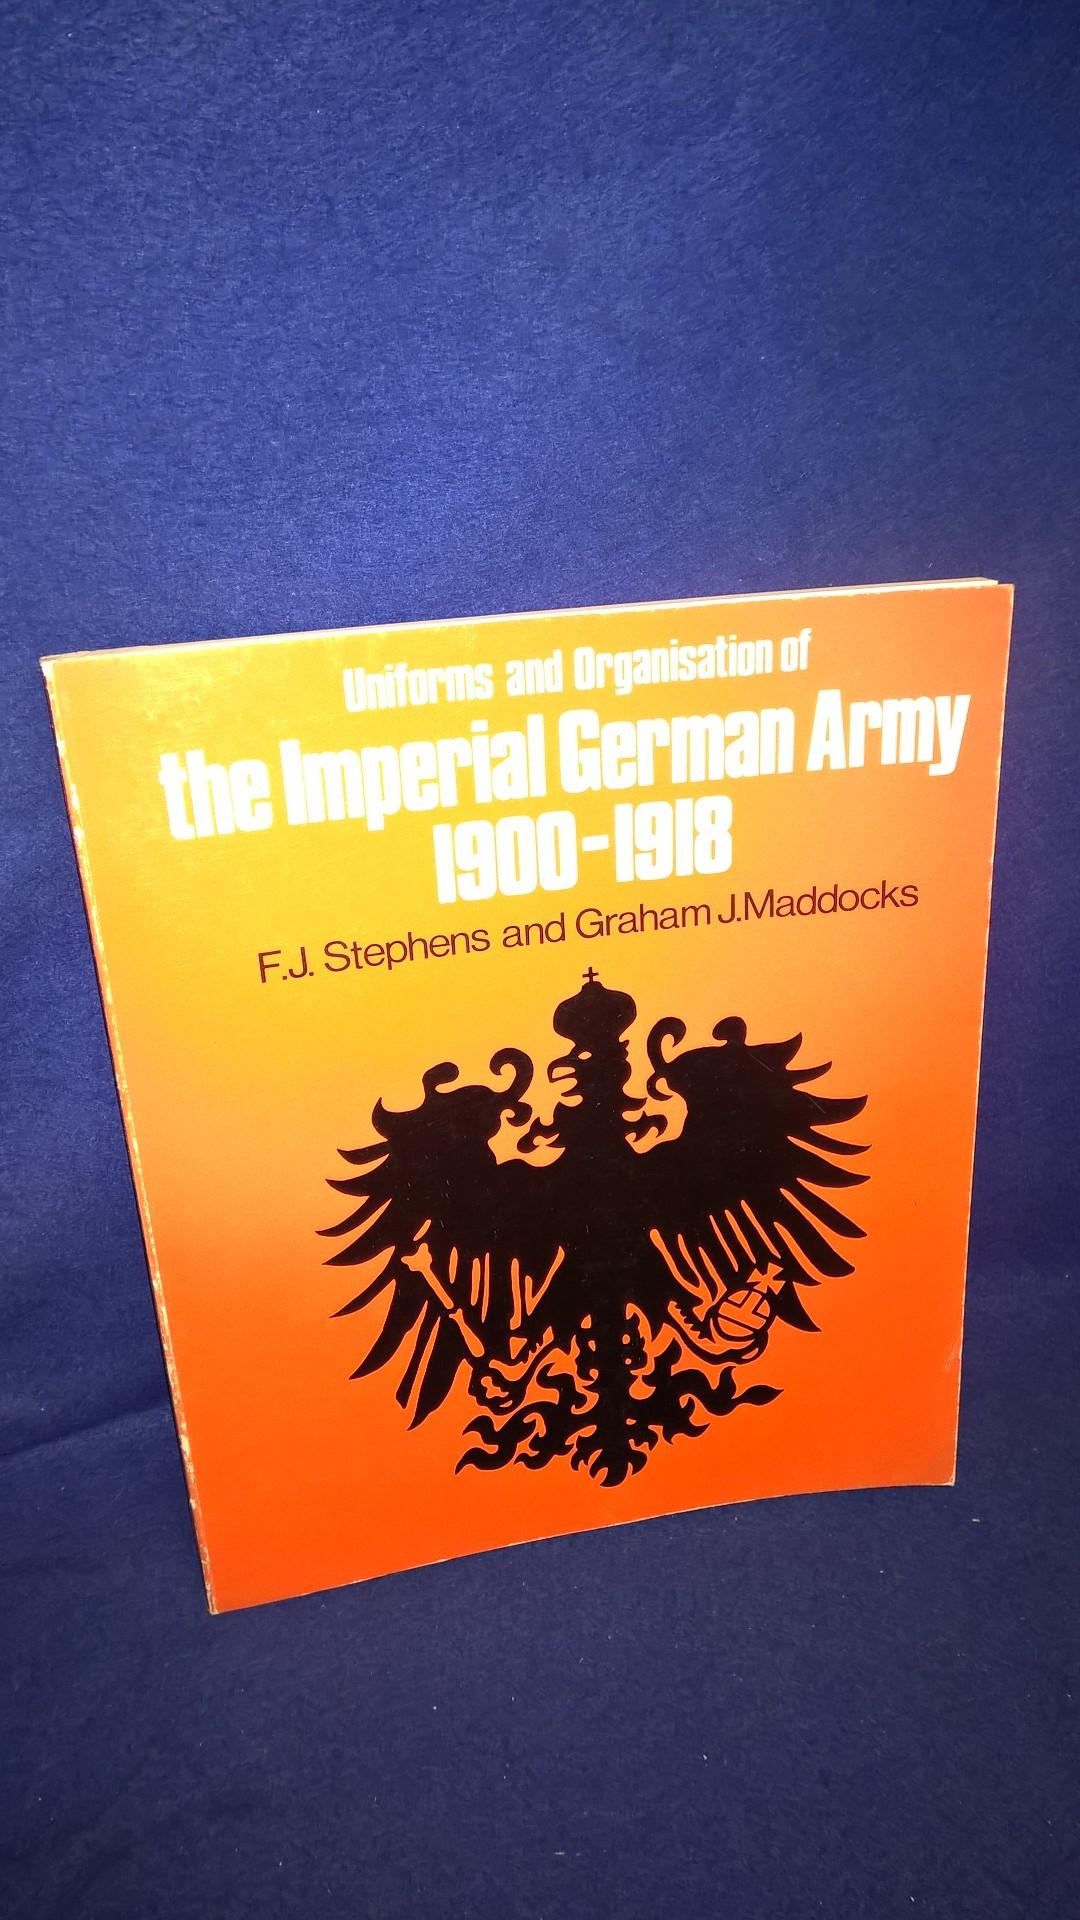 Uniforms and Organisation of the Imperial German Army 1900 - 1918.